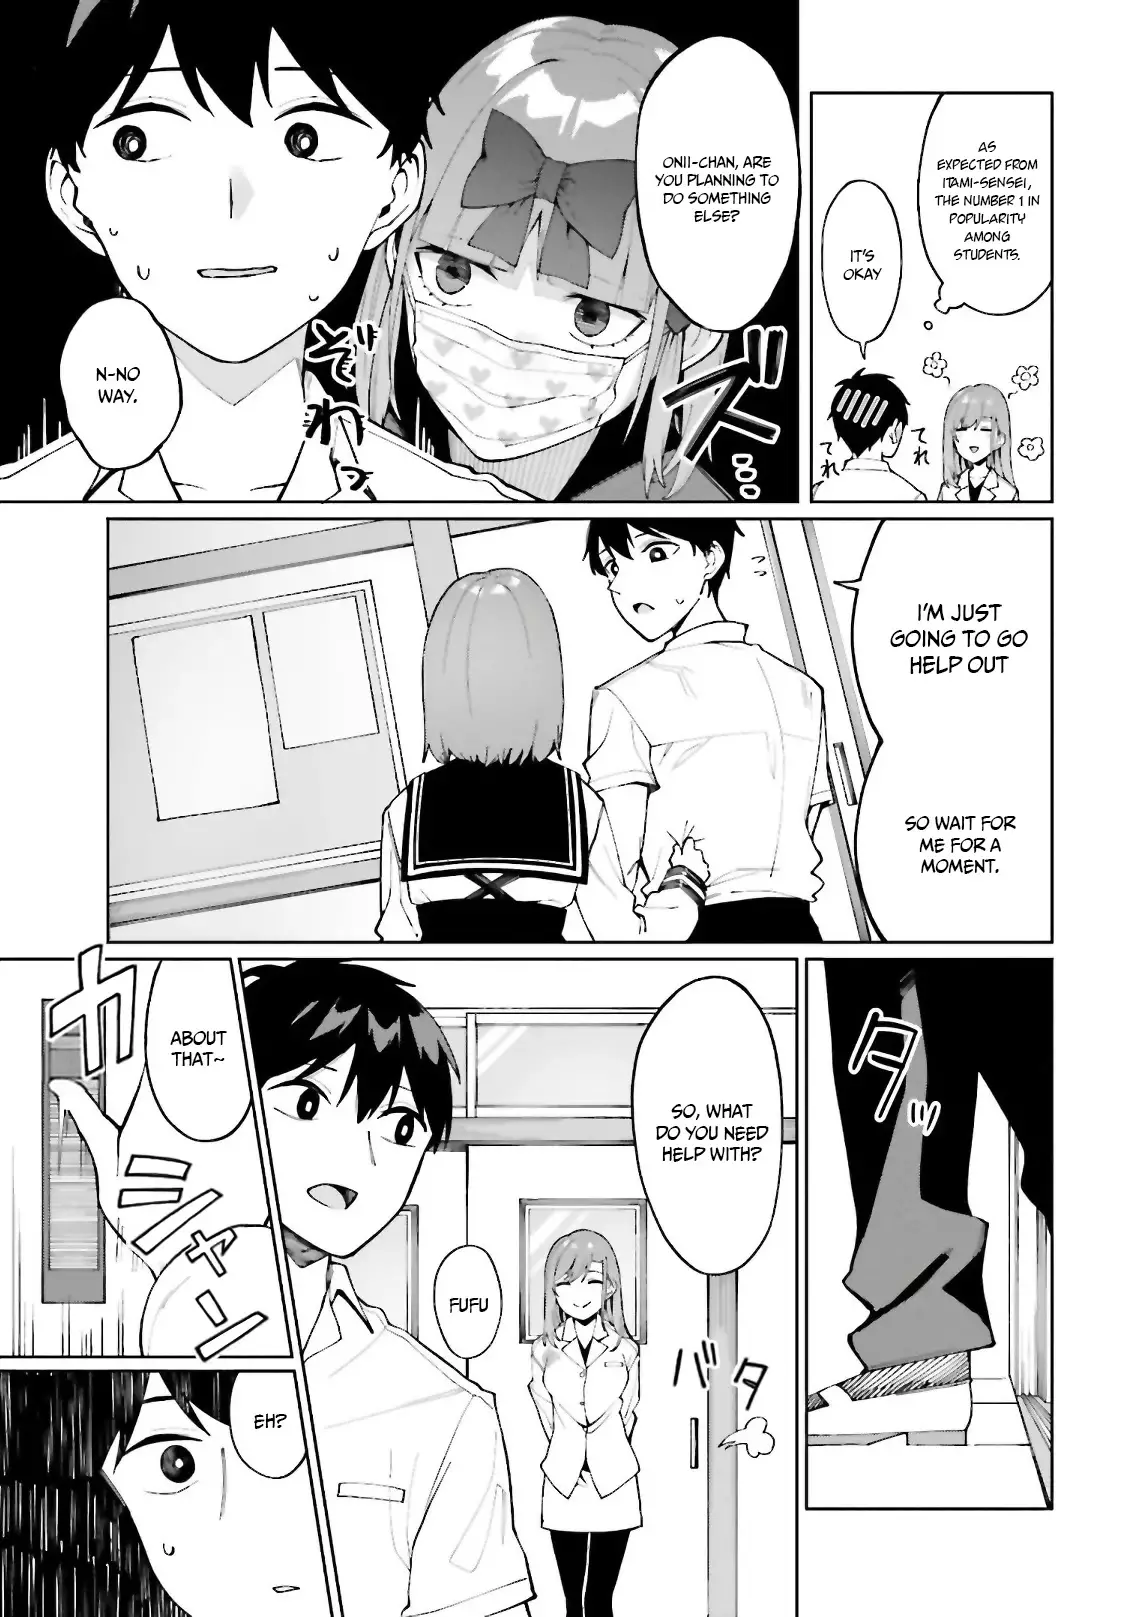 I Don't Understand Shirogane-San's Facial Expression At All - 7 page 16-8949b926